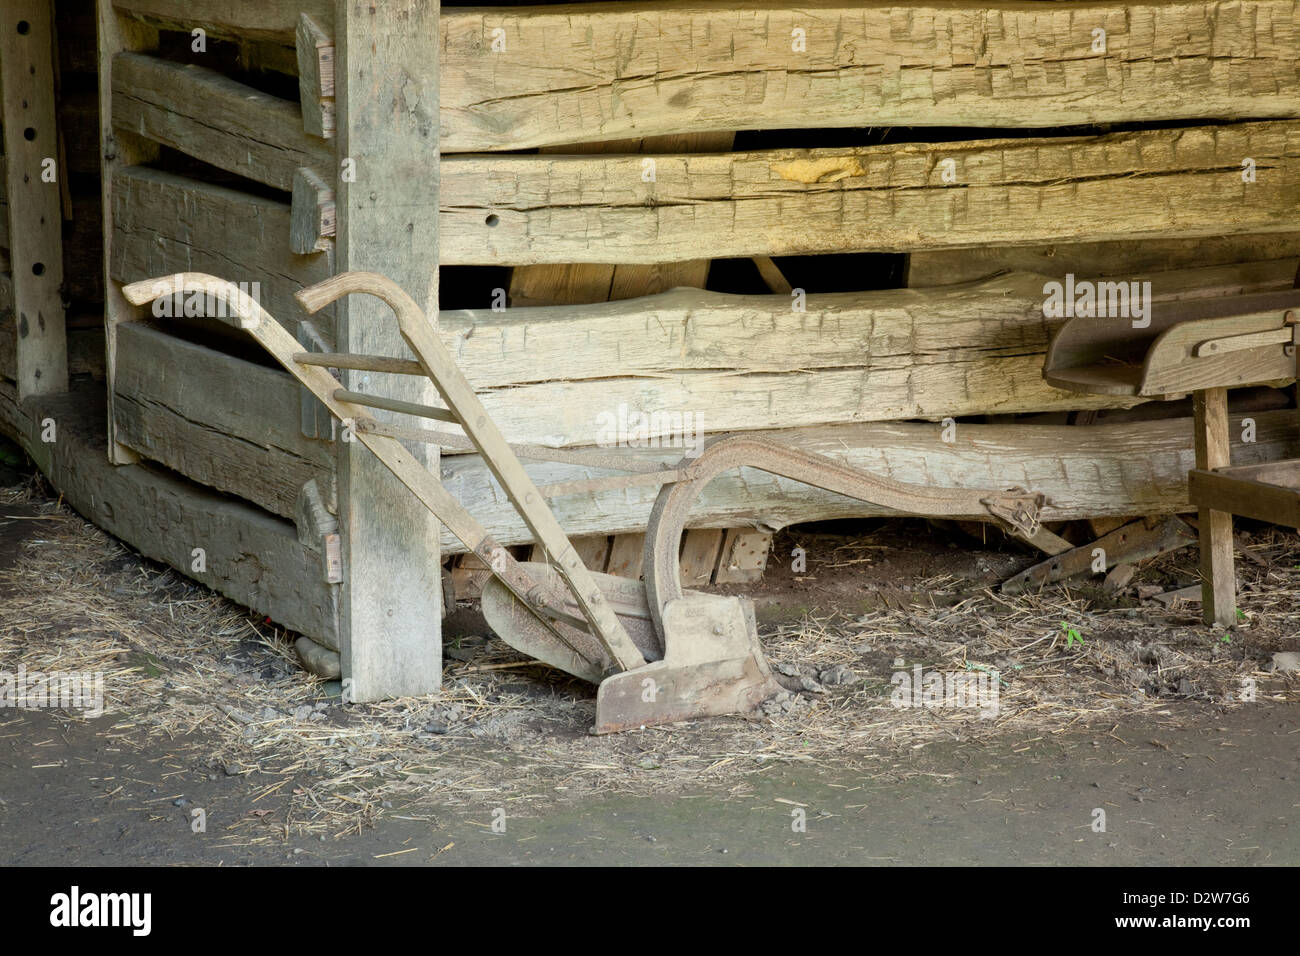 Plow standing in a barn against rough hand cut wood of a pen Stock Photo